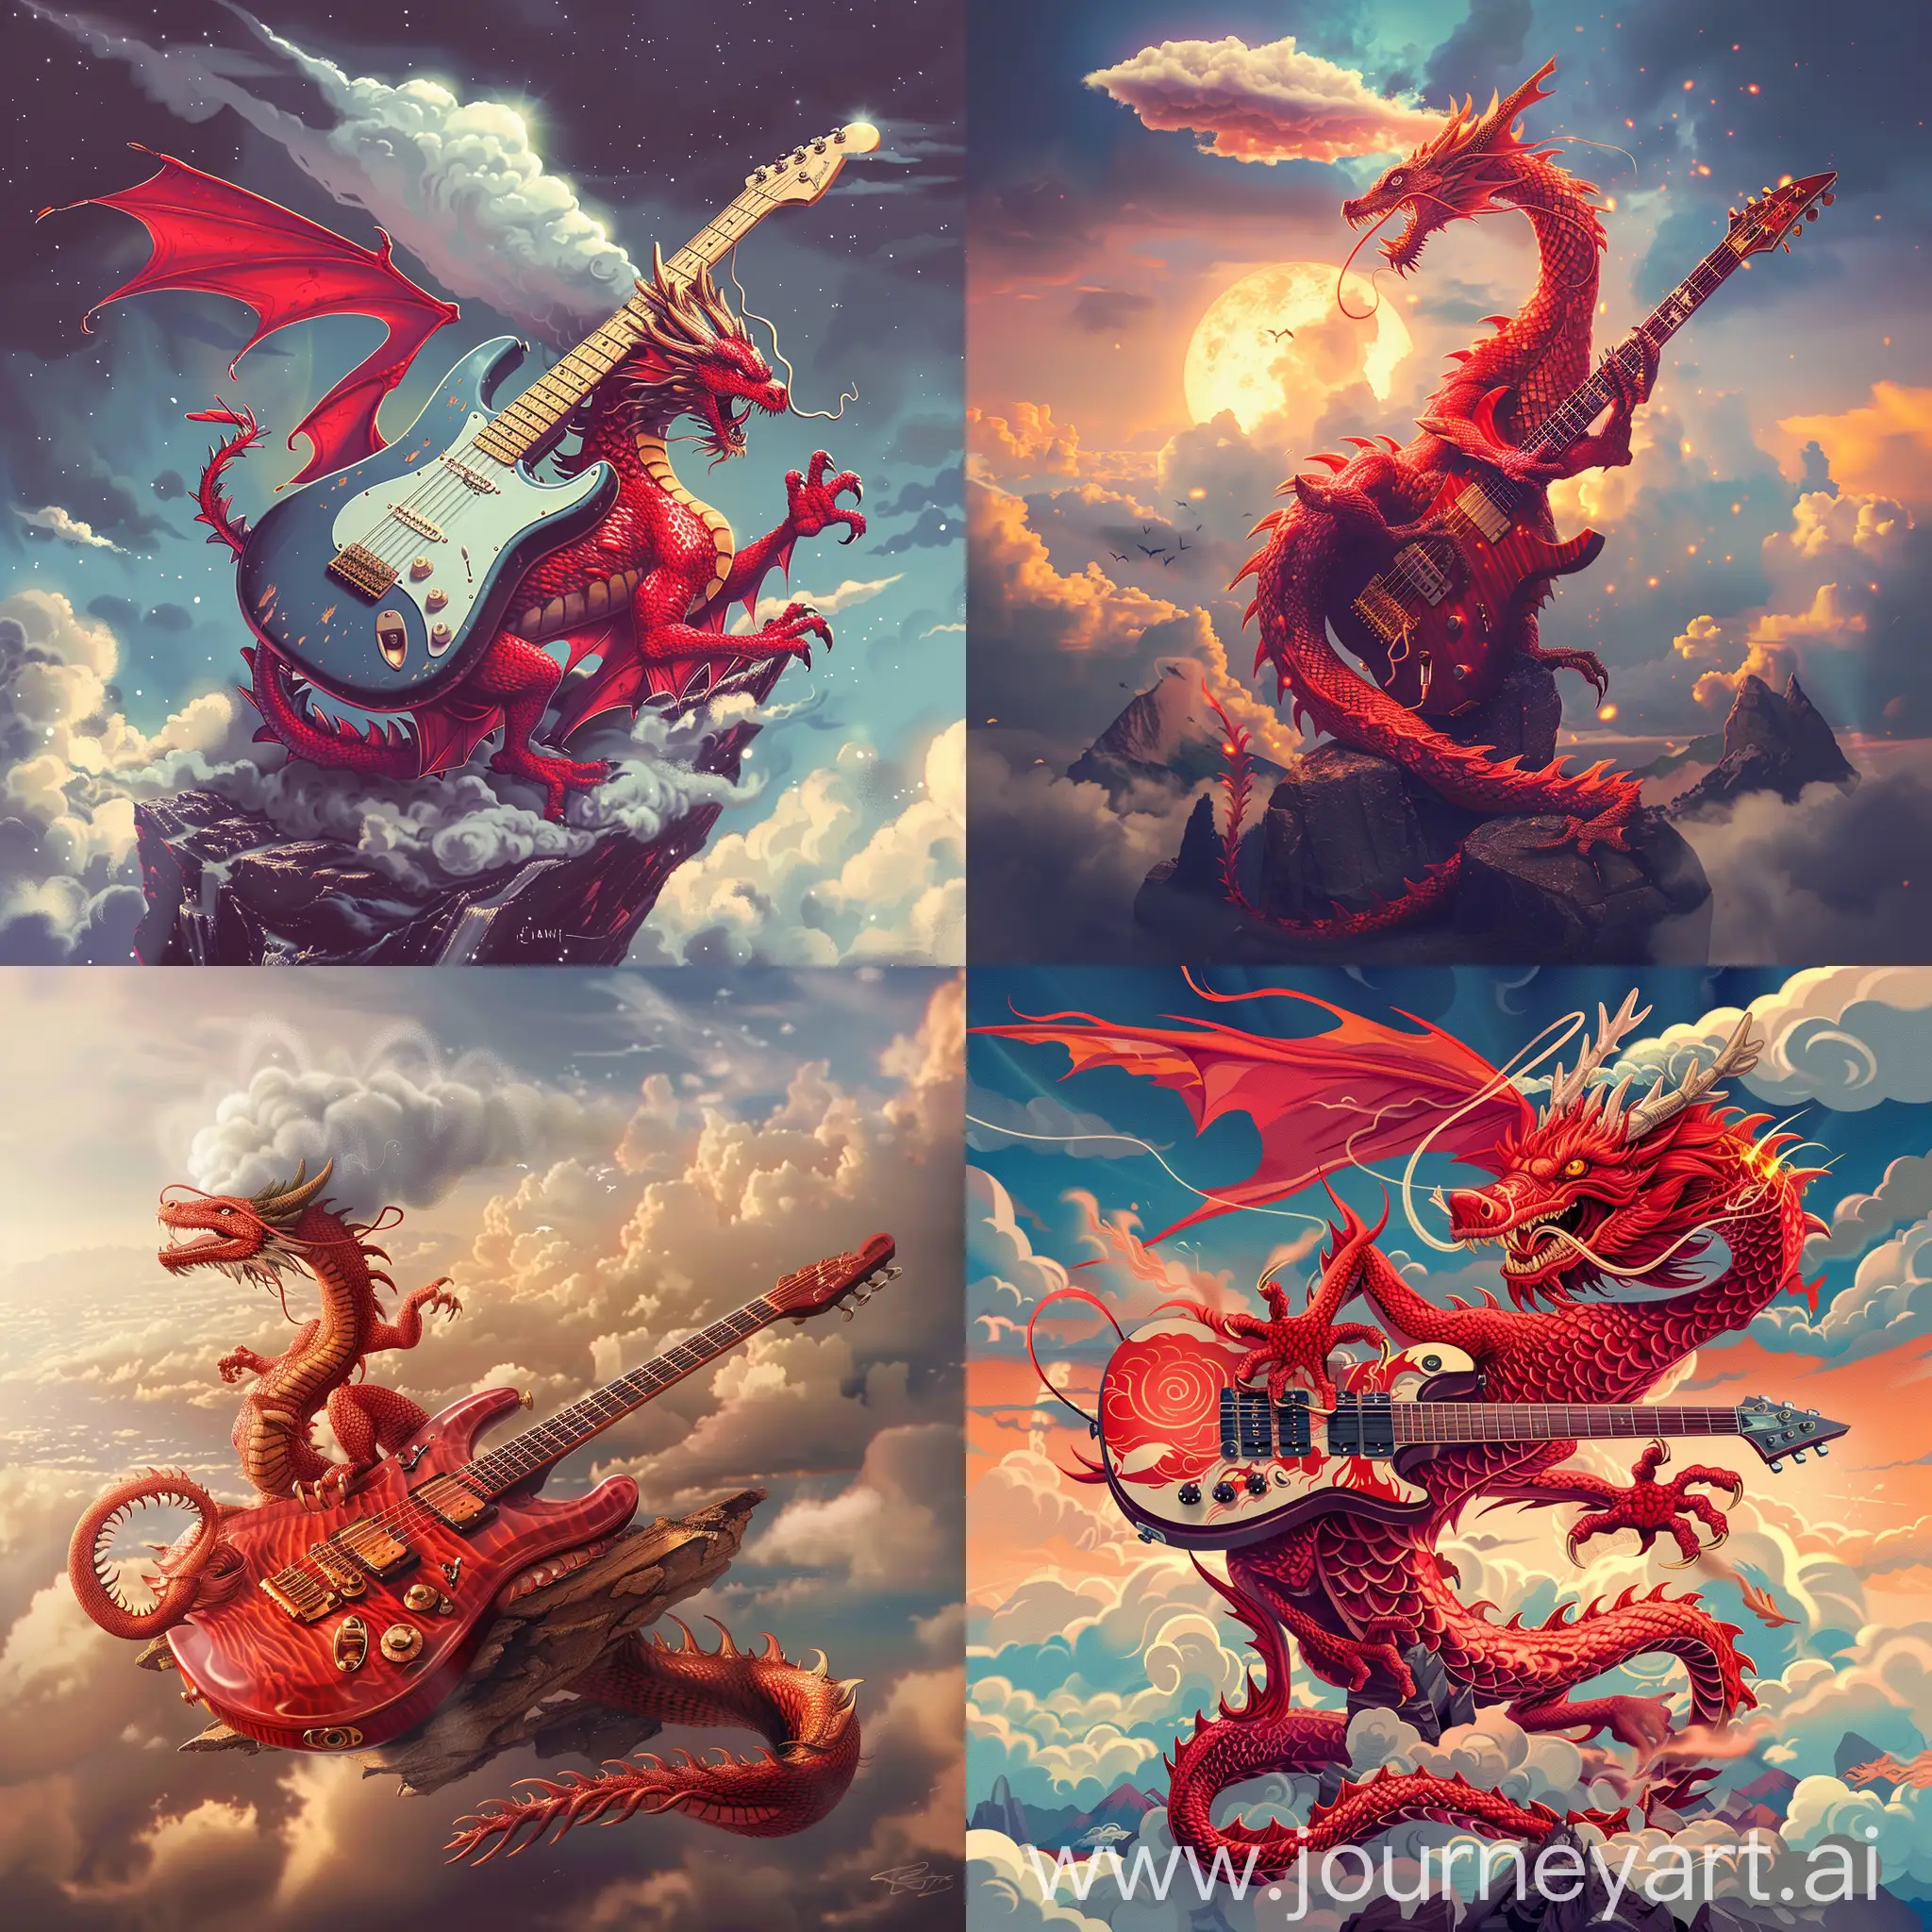 Red-Dragon-Riding-a-Flying-Nimbus-with-Guitar-Solo